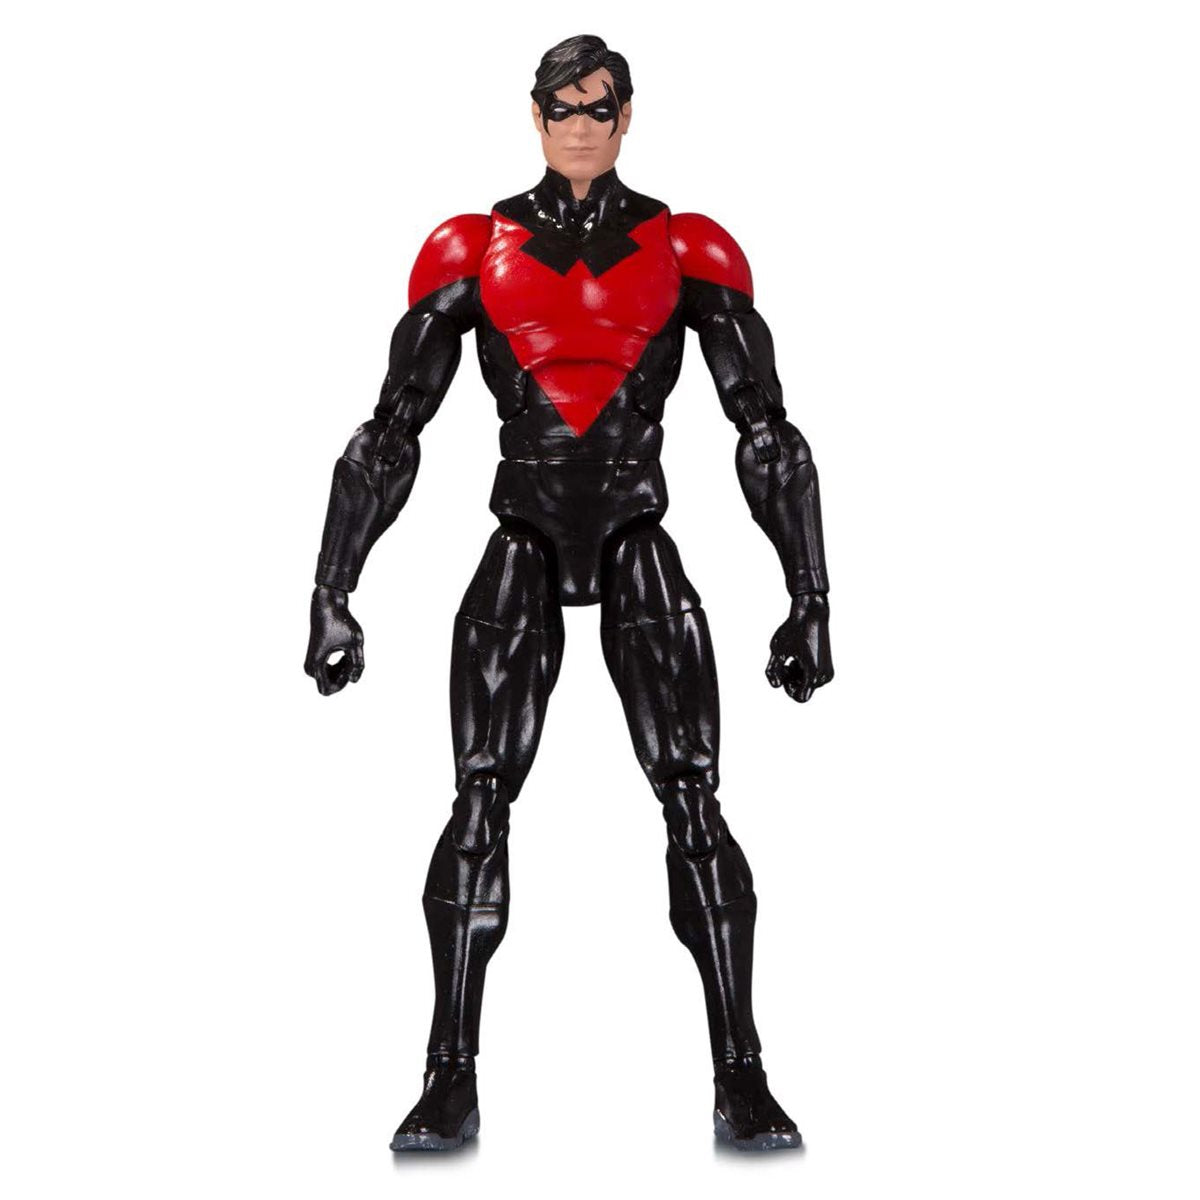 DC Essentials Nightwing New 52 7" Action Figure